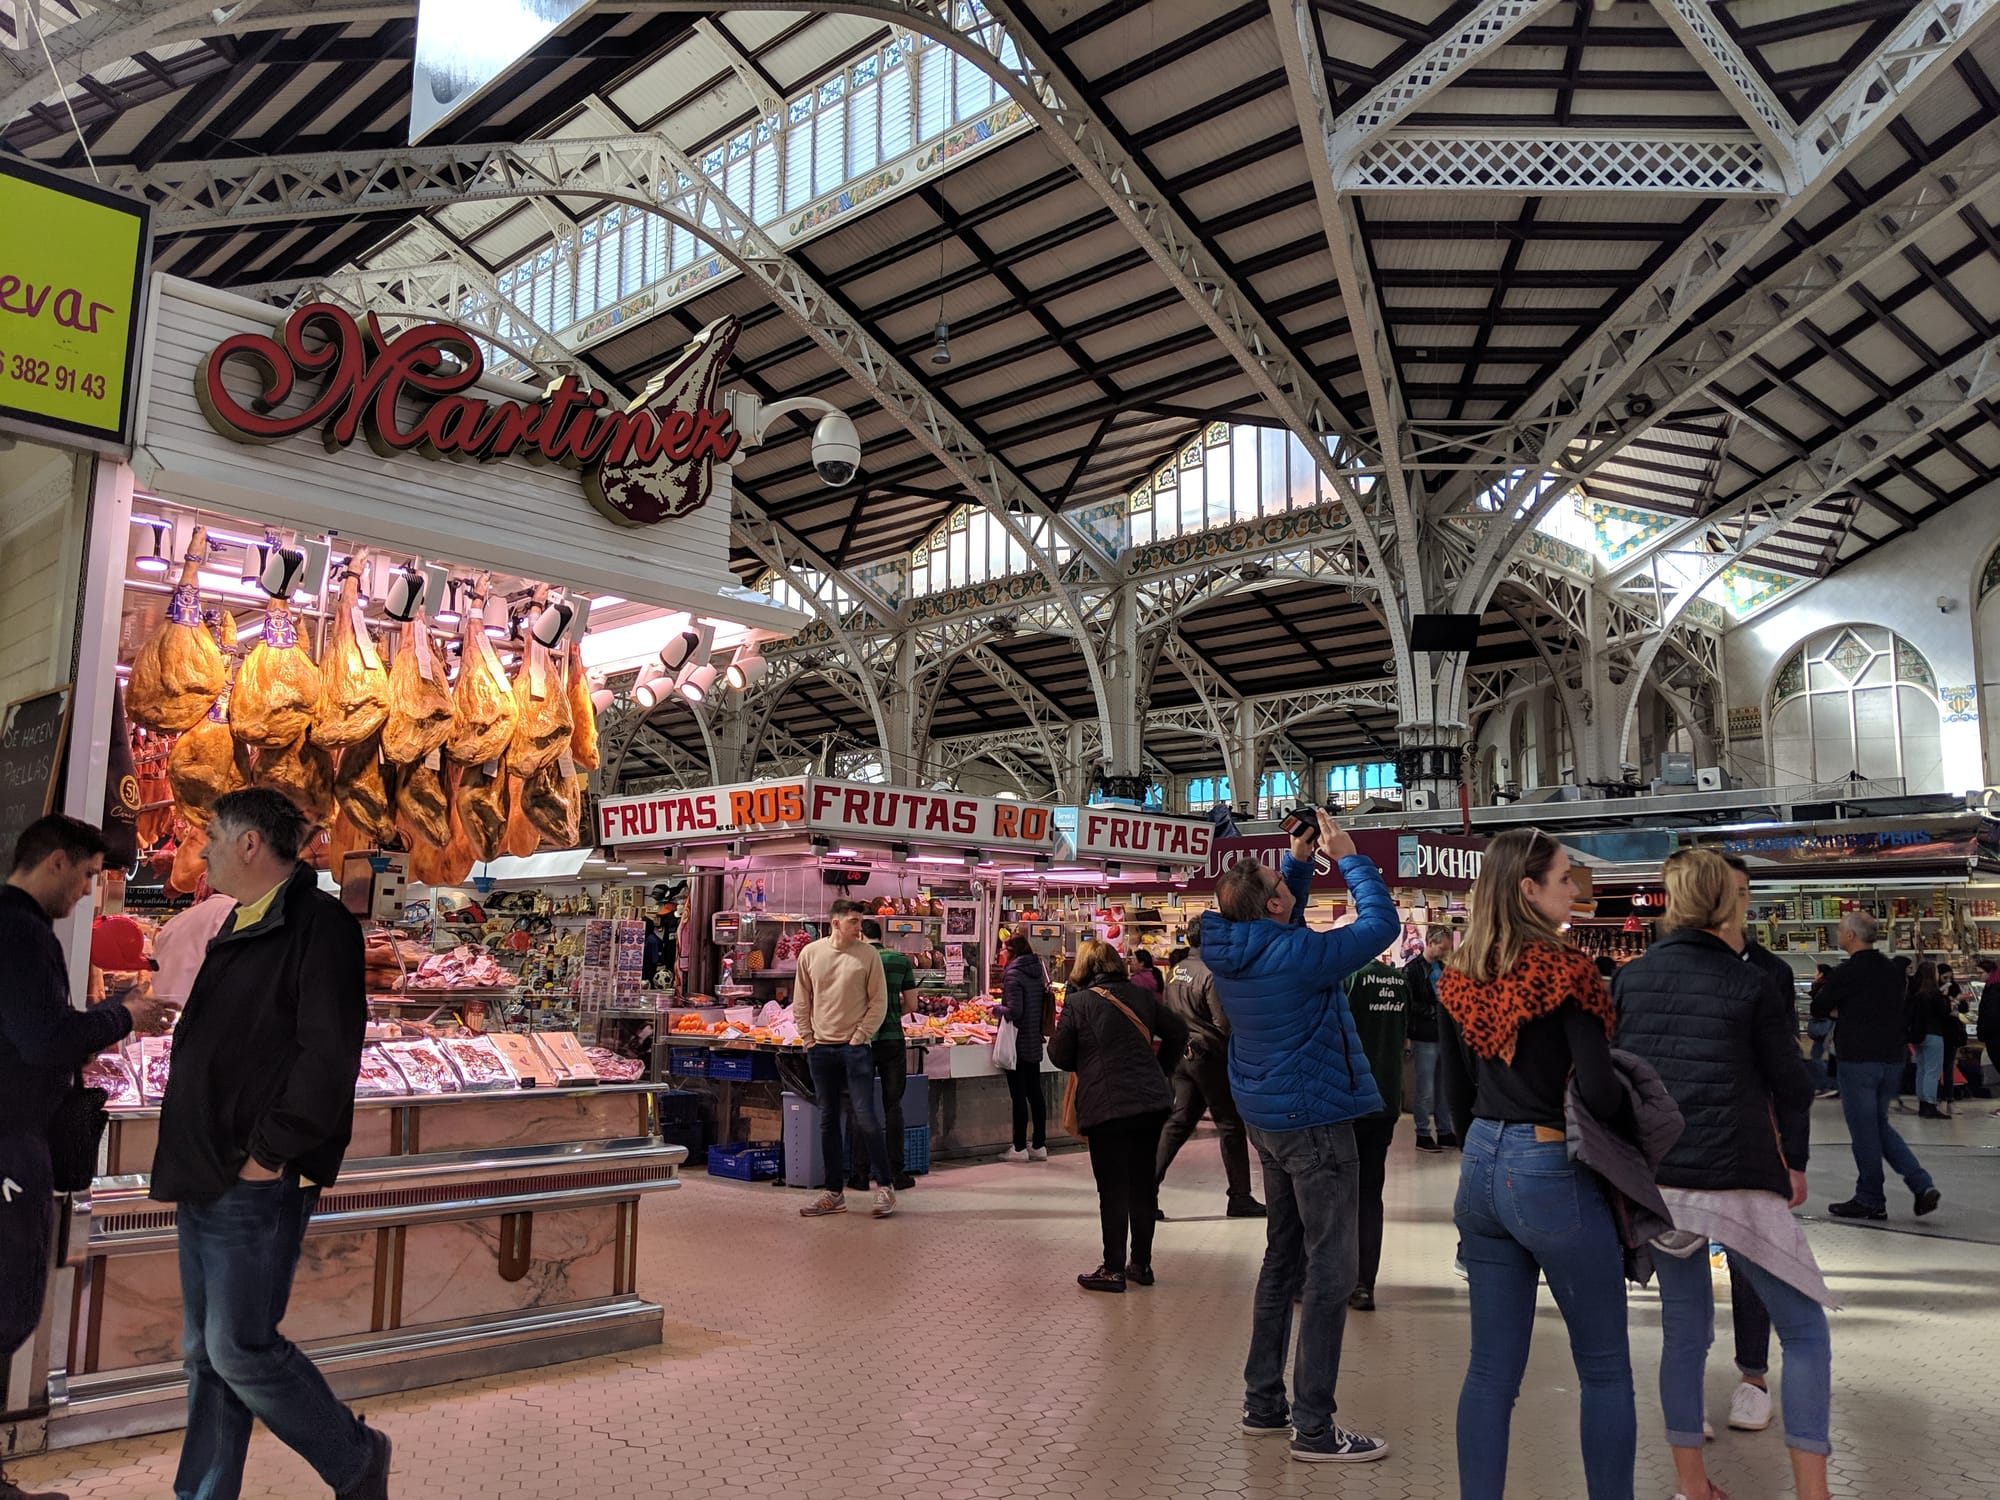 Most European cities have a Mercado, or street markets